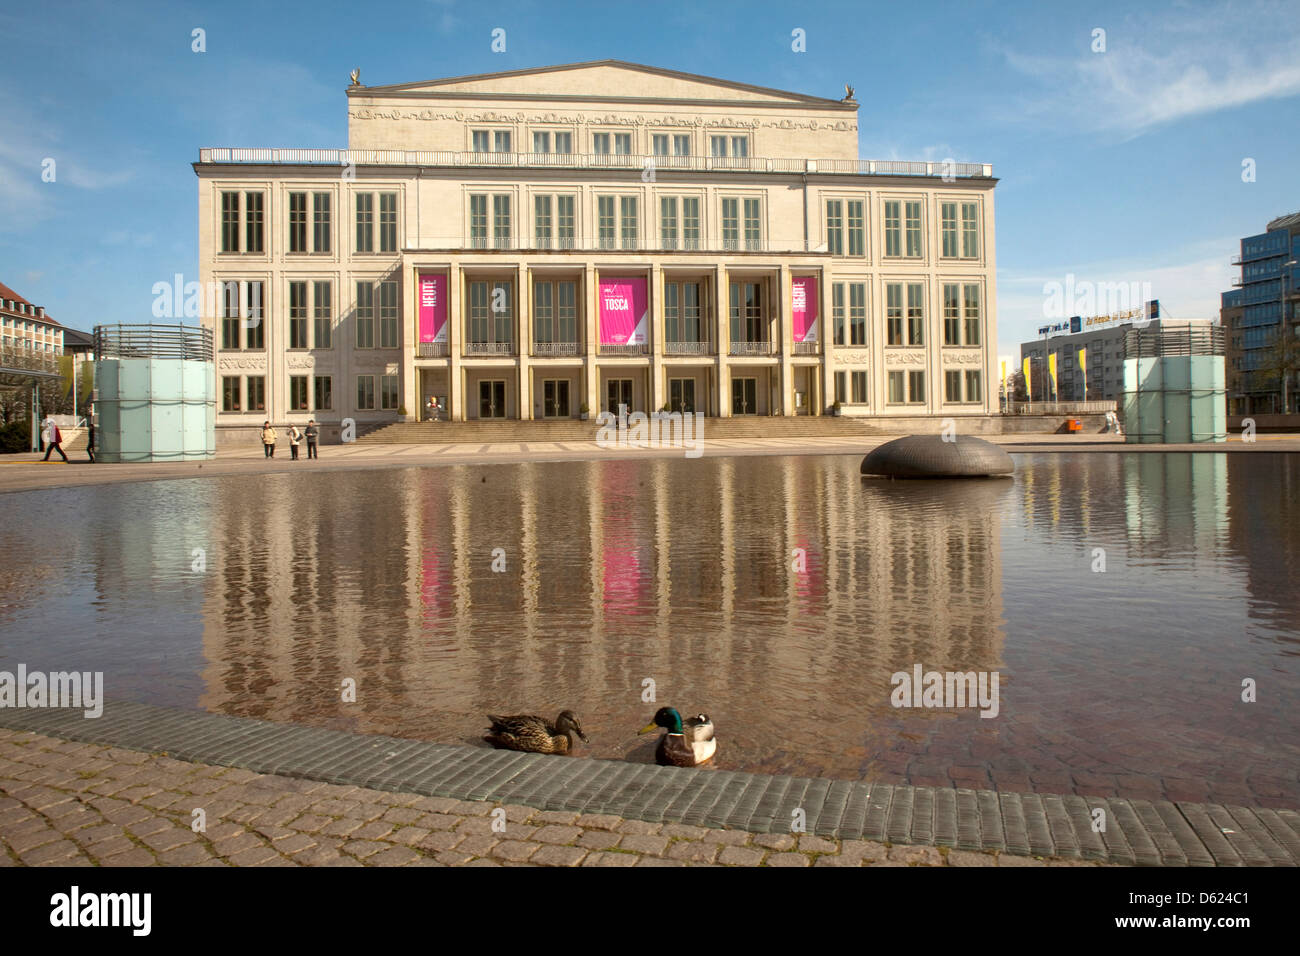 Opera House on Leipzig, Germany's Augustus Plaza with reflecting pond in front. Stock Photo